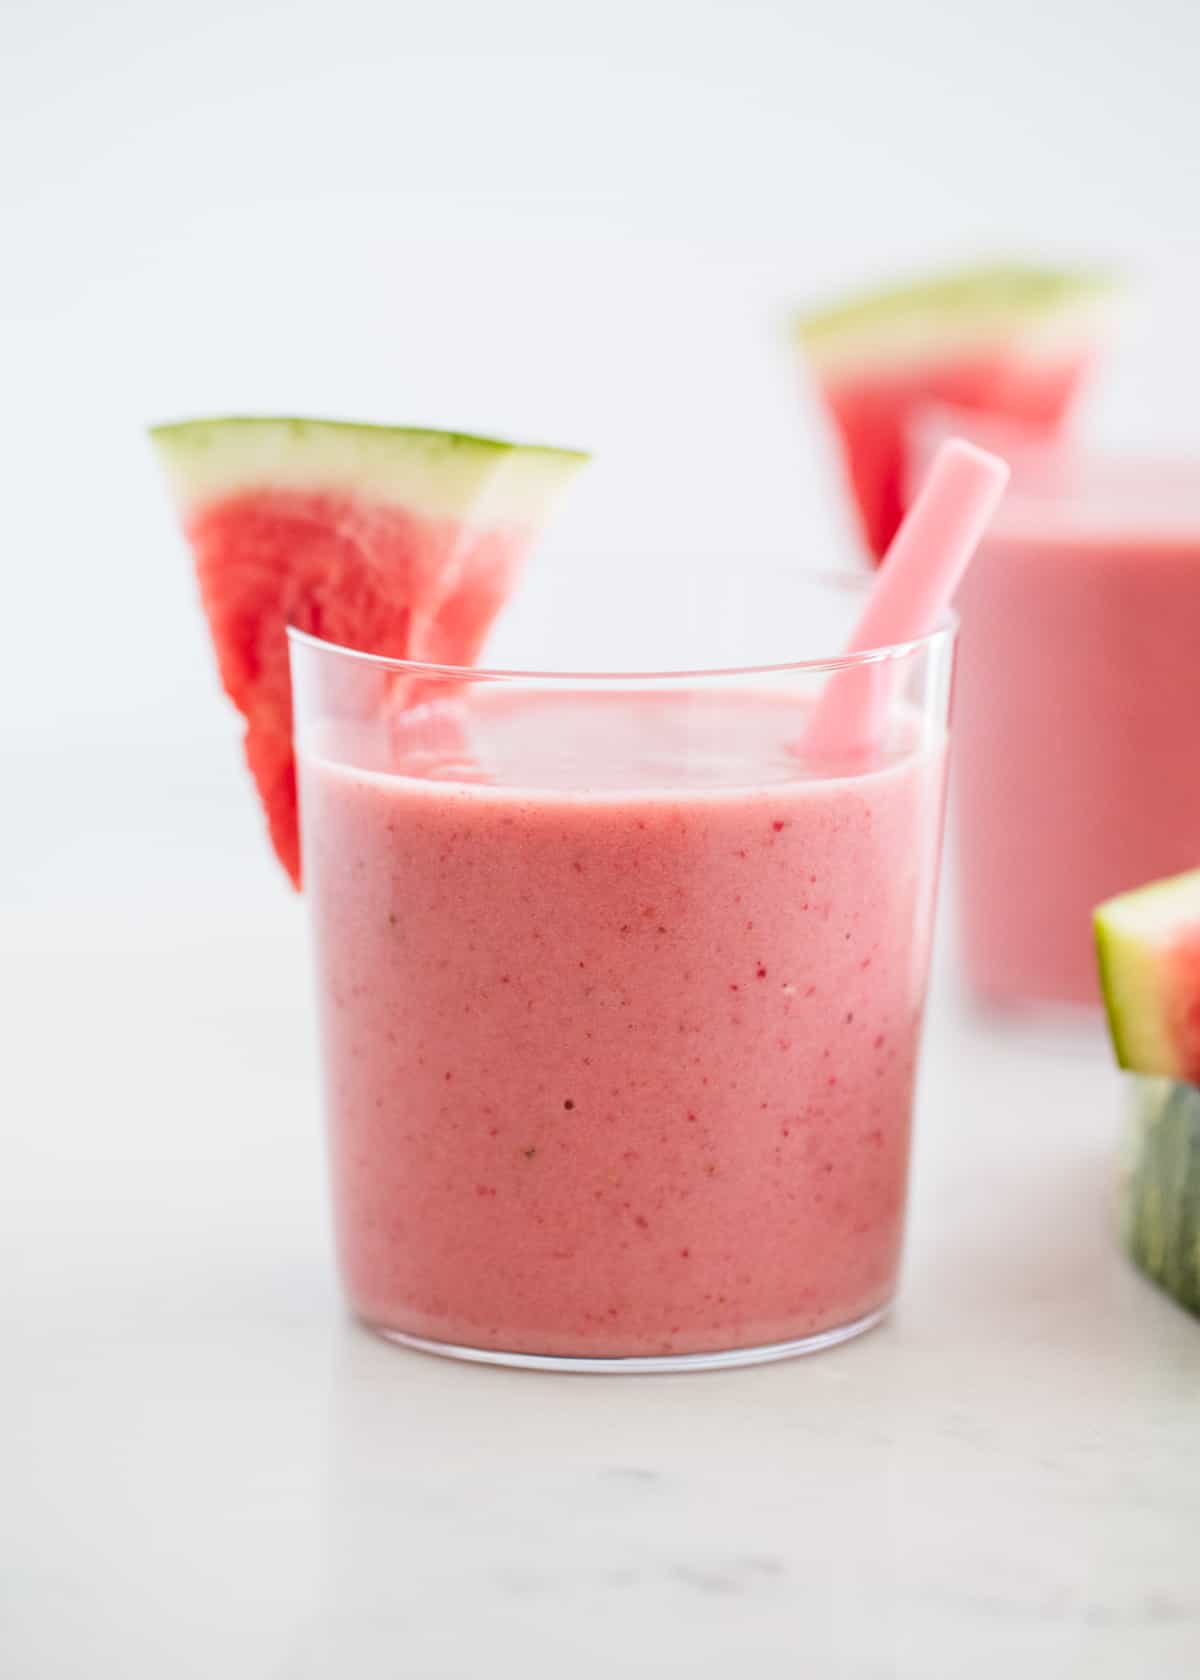 Watermelon smoothie in glass cups.